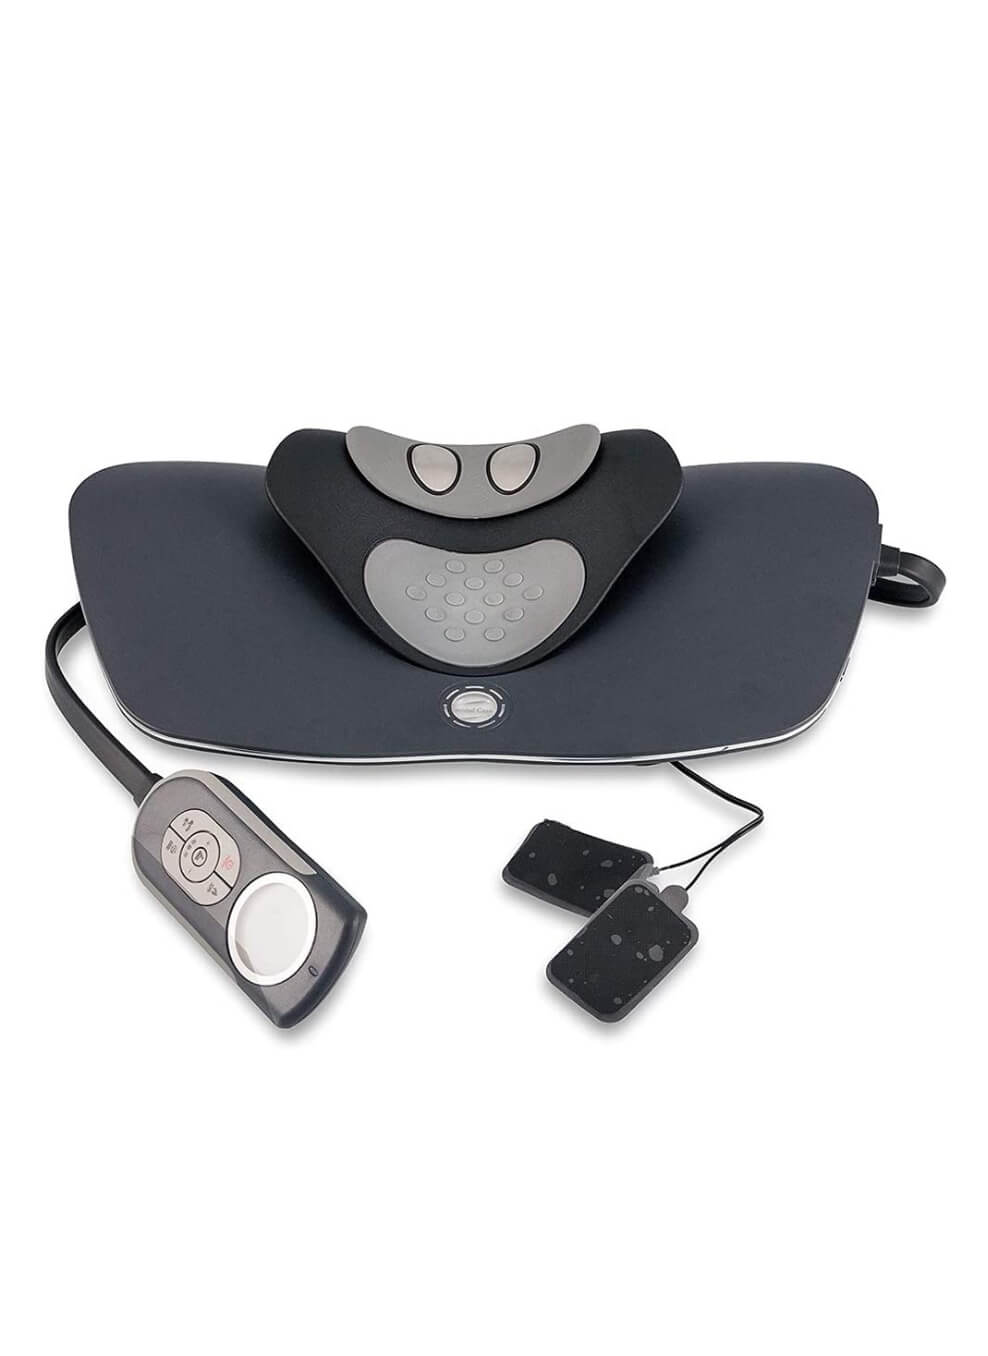 PMT Dynamic Wedge Automatic Lumbar Traction Device: Back Pain Relief